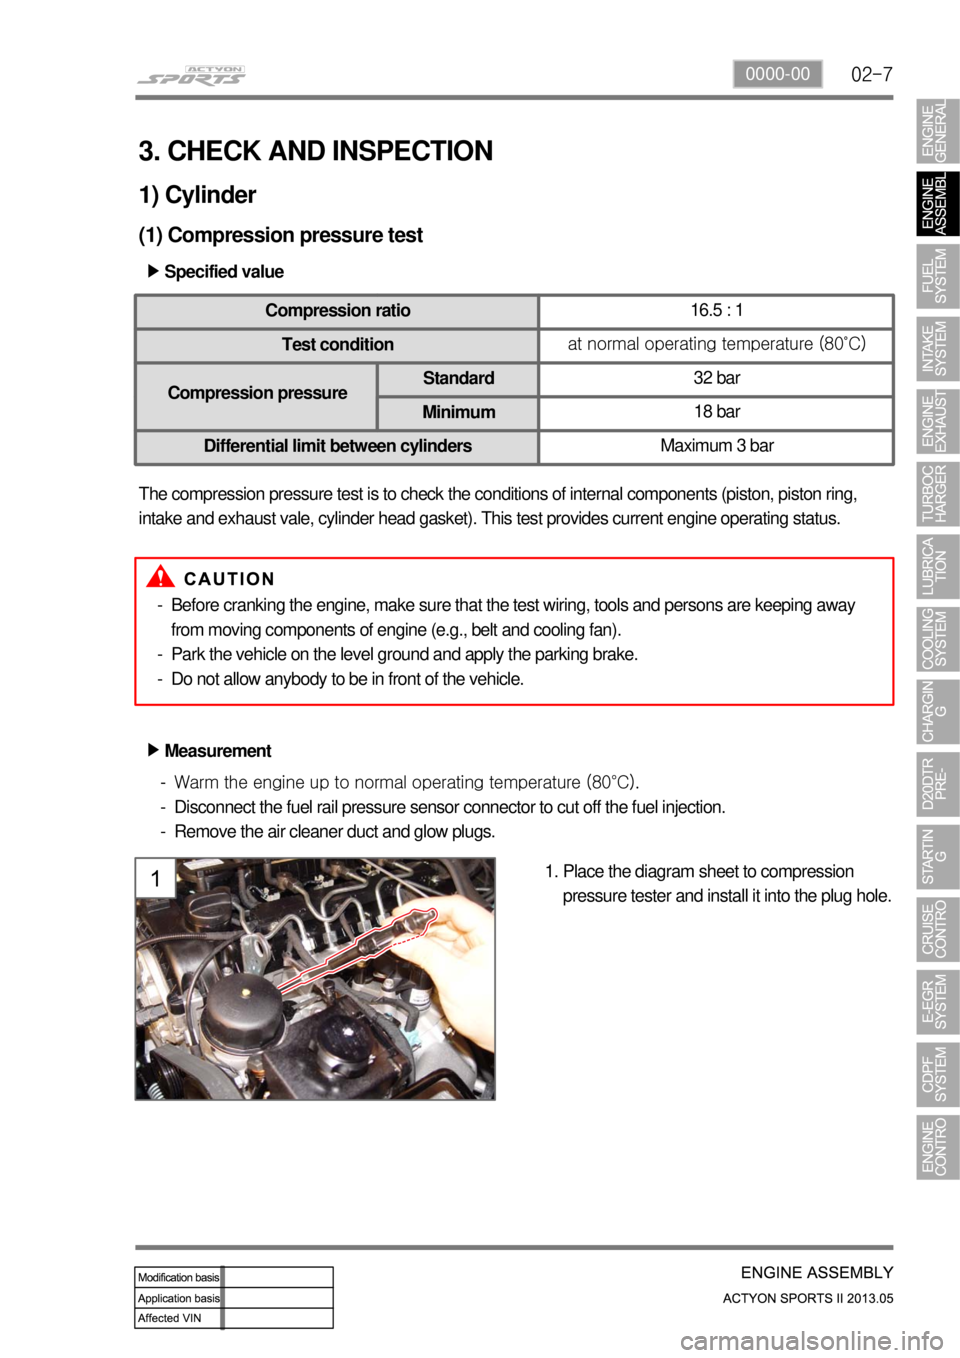 SSANGYONG NEW ACTYON SPORTS 2013  Service Manual 02-70000-00
3. CHECK AND INSPECTION
1) Cylinder
(1) Compression pressure test
Specified value ▶
Compression ratio16.5 : 1 
Test conditionat normal operating temperature (80˚C)
Compression pressureS